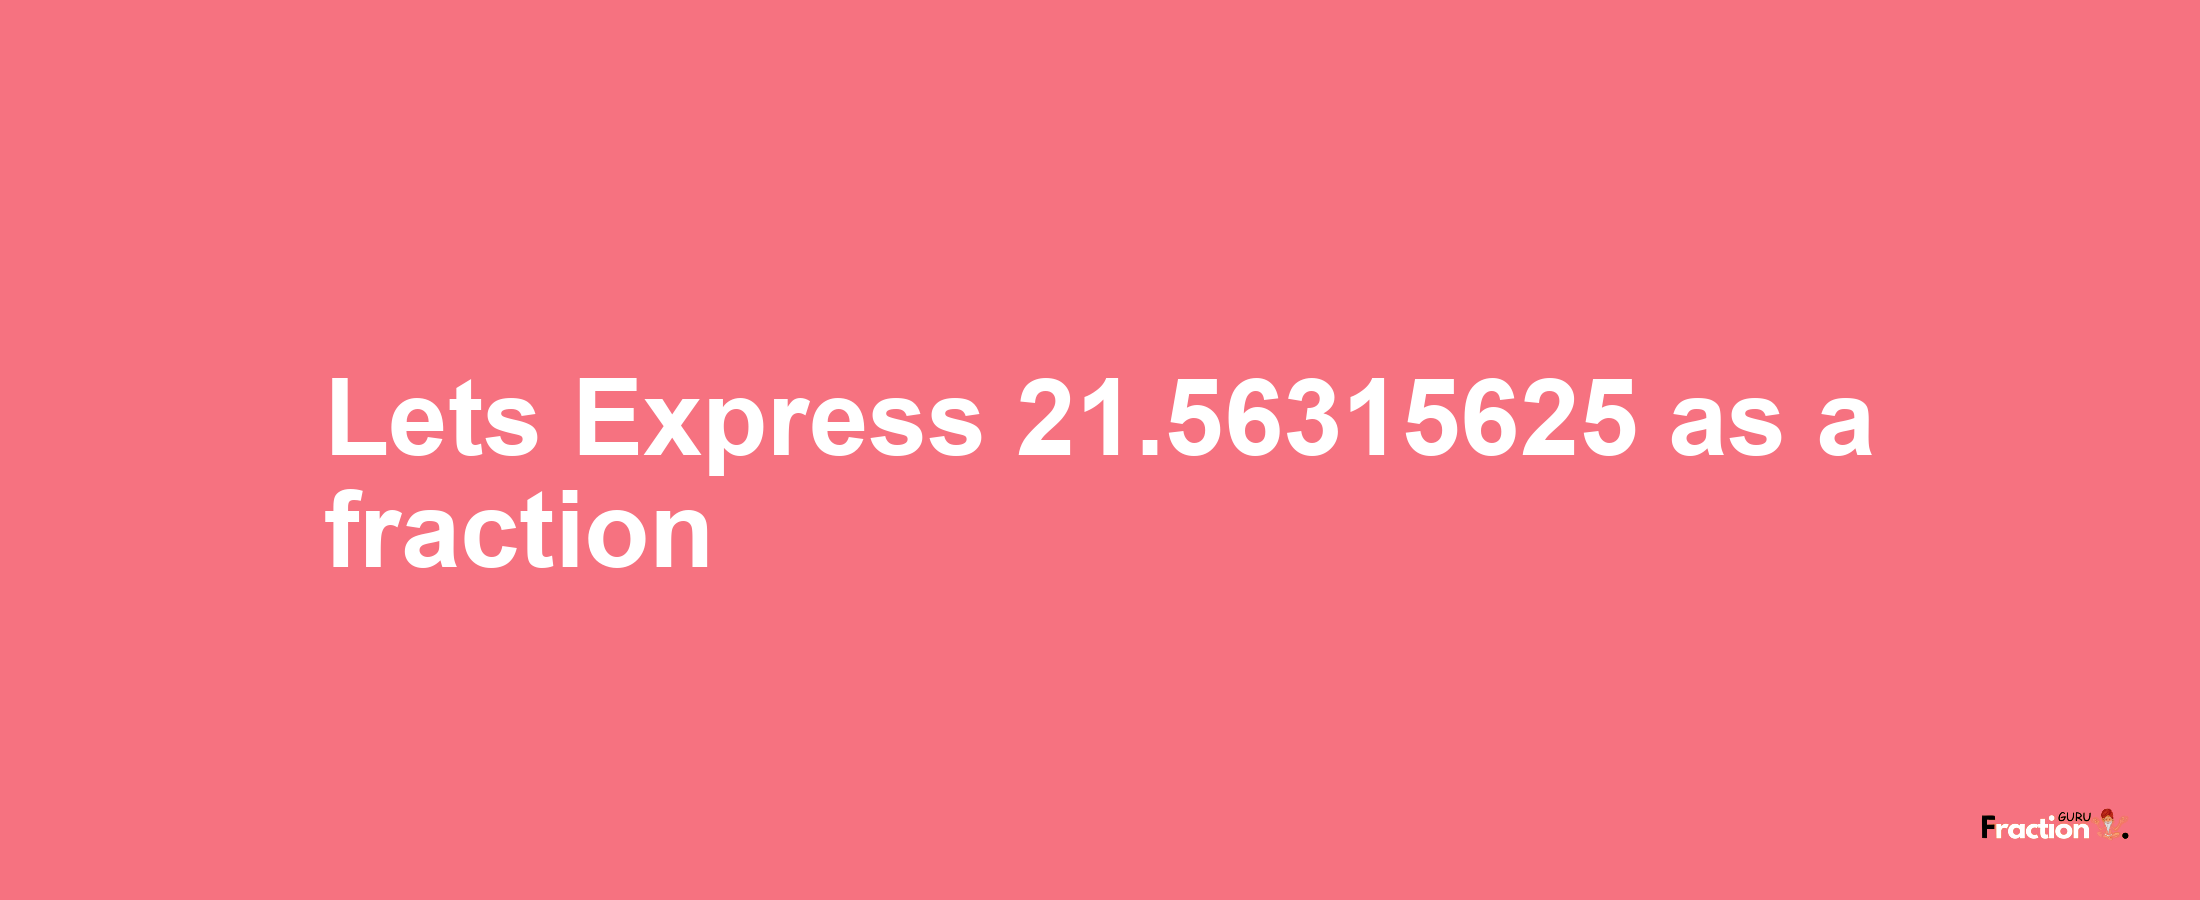 Lets Express 21.56315625 as afraction